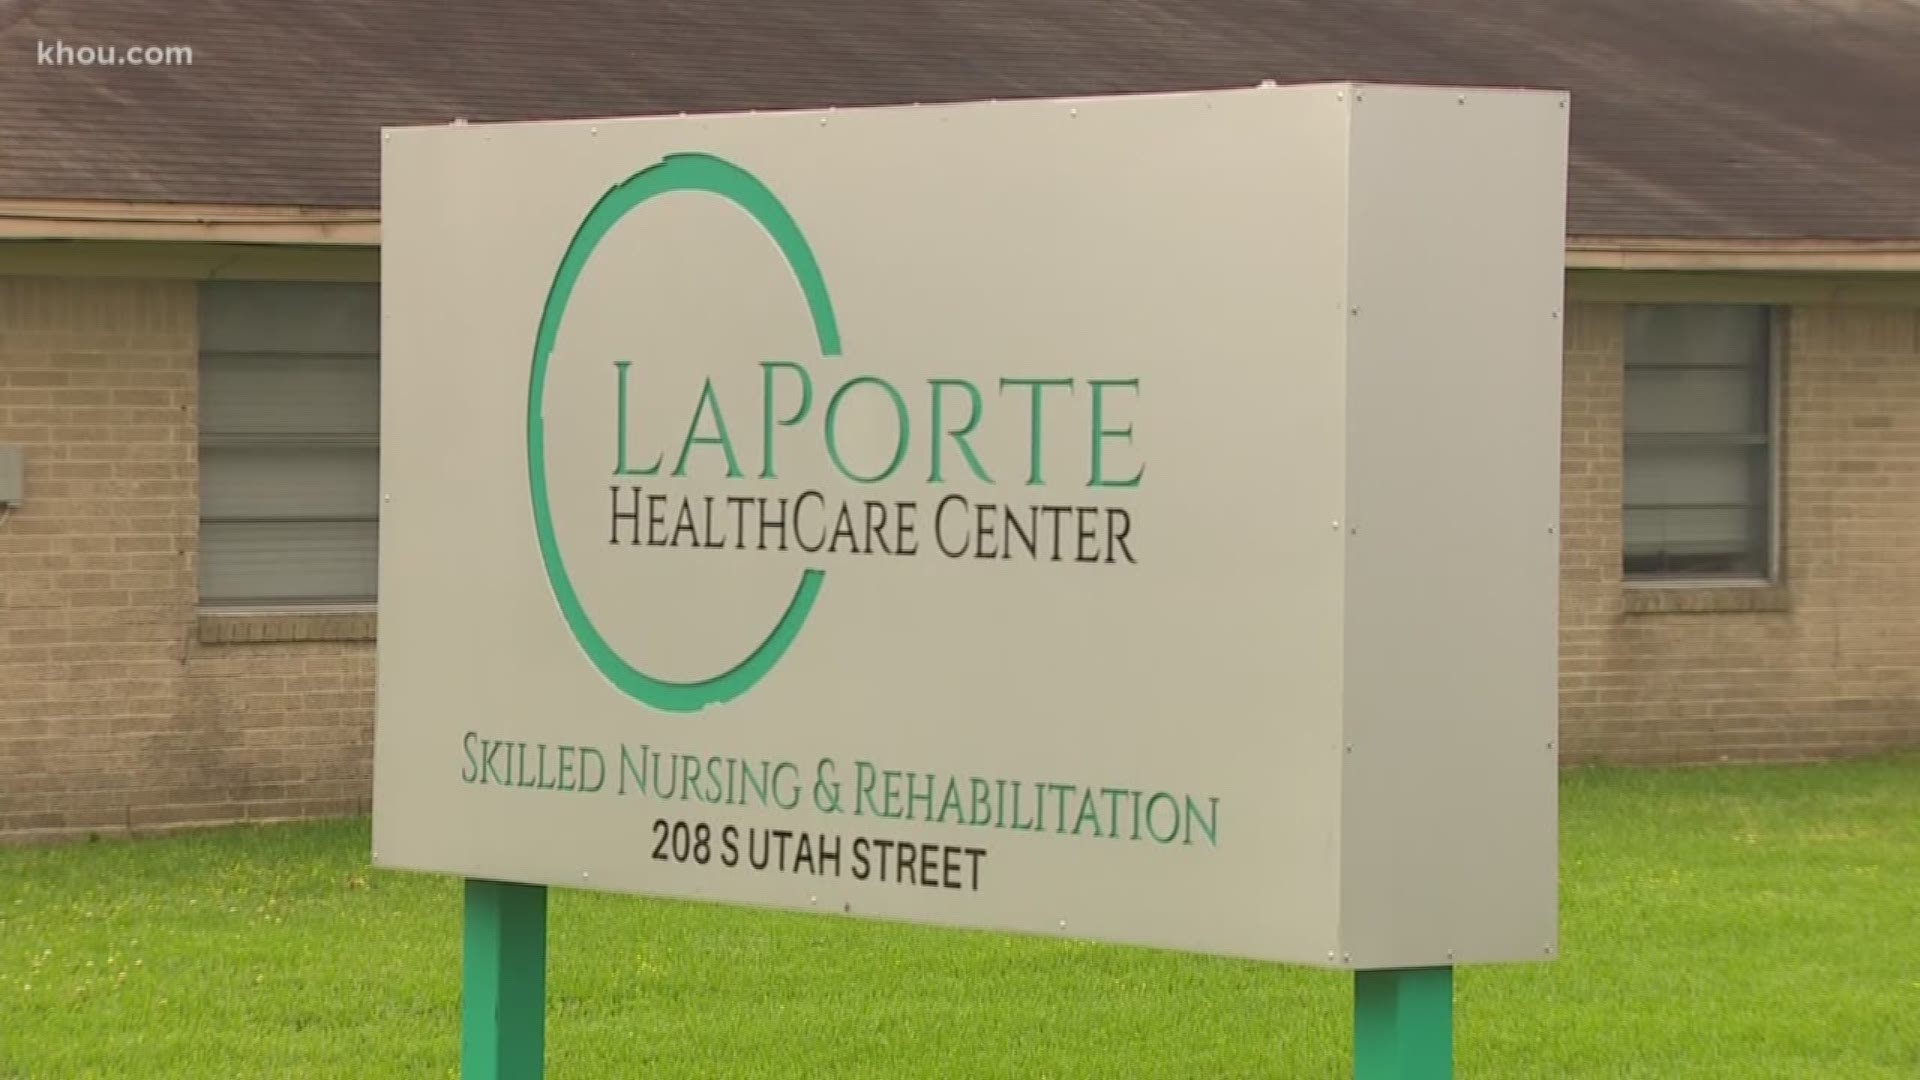 34 people, both employees and residents, at the LaPorte Healthcare Center have tested positive for COVID-19.